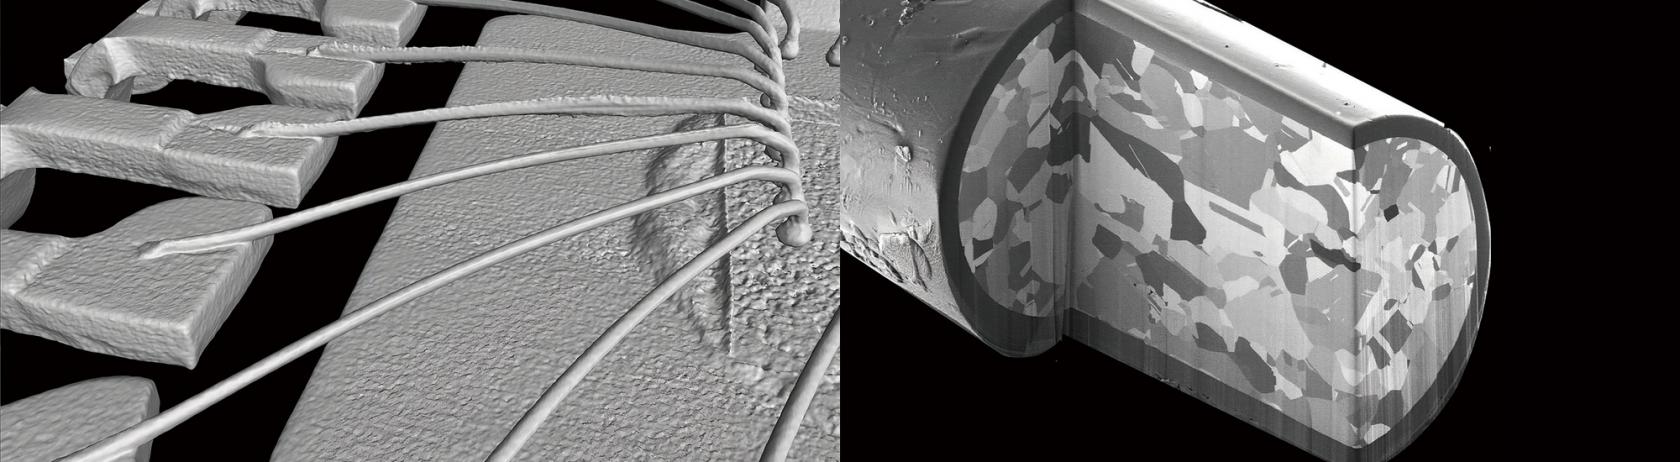 left: X-ray CT image of a semiconductor package, right: a partial cross section of a copper wire